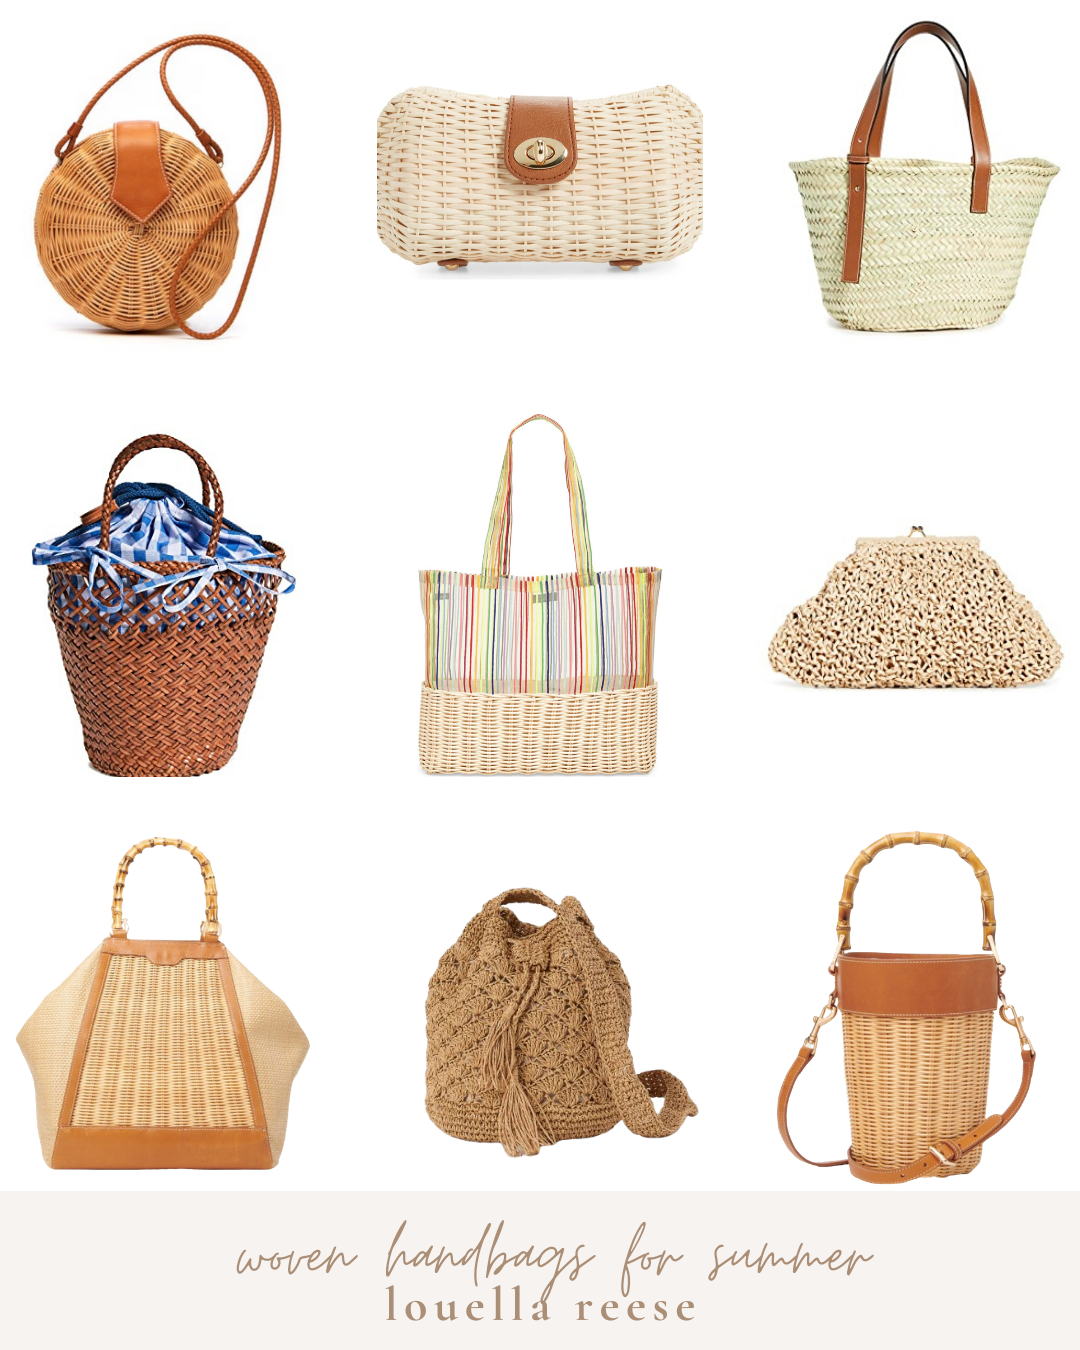 The Best Woven Bags for Summer 2020 | Straw, Wicker, and Woven Handbags | Louella Reese